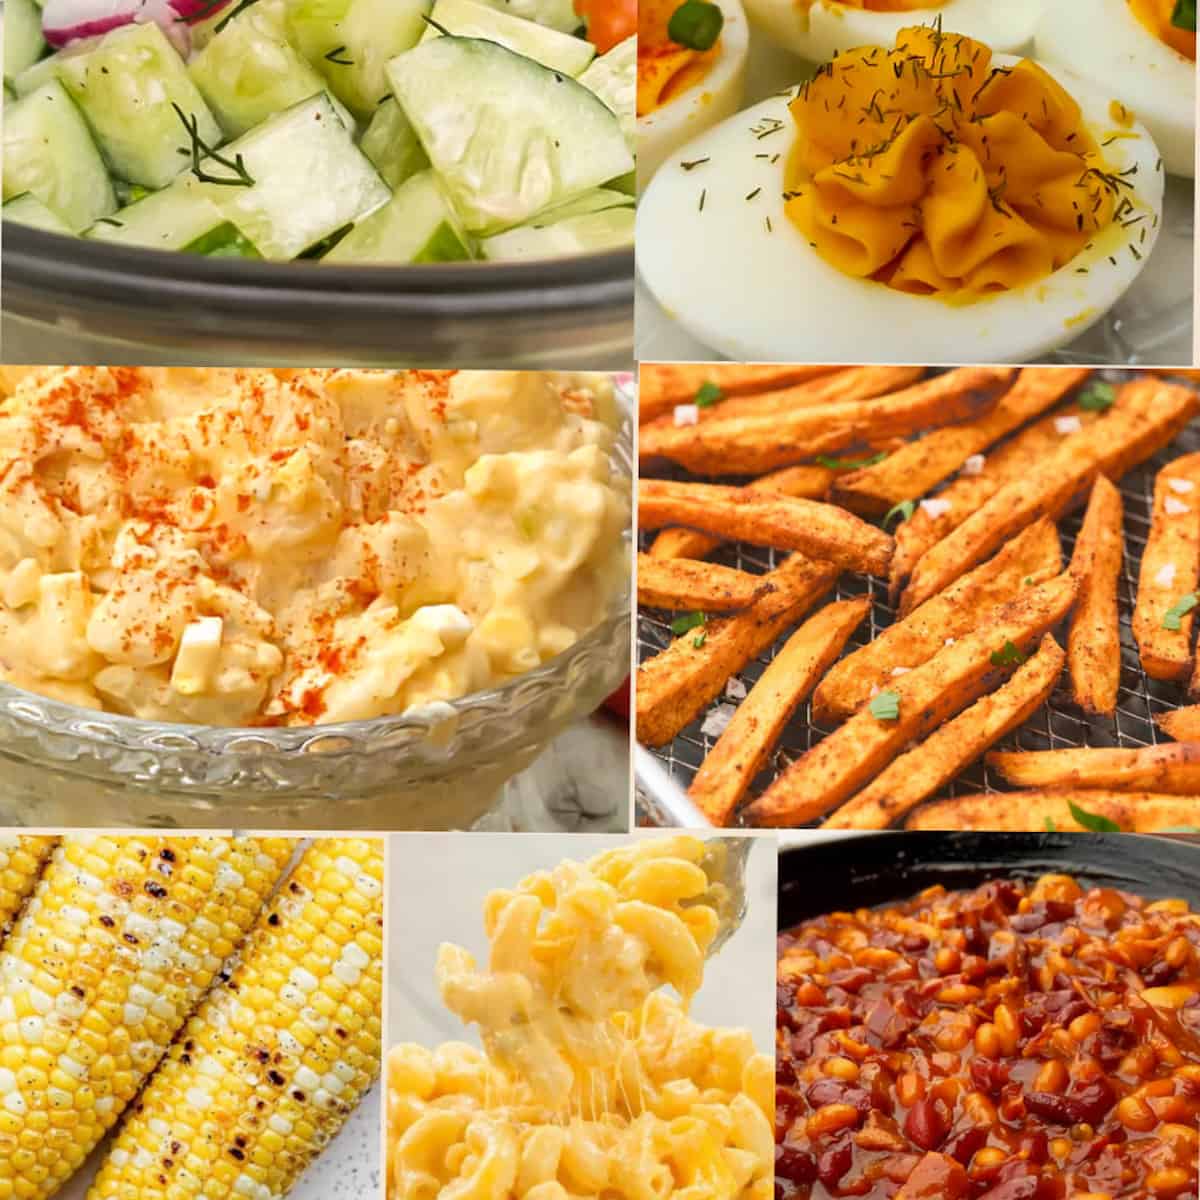 sides for burgers: pictured are sweet corn, potato salad, cucumber salad, deviled eggs, sweet potato fries, and baked beans.